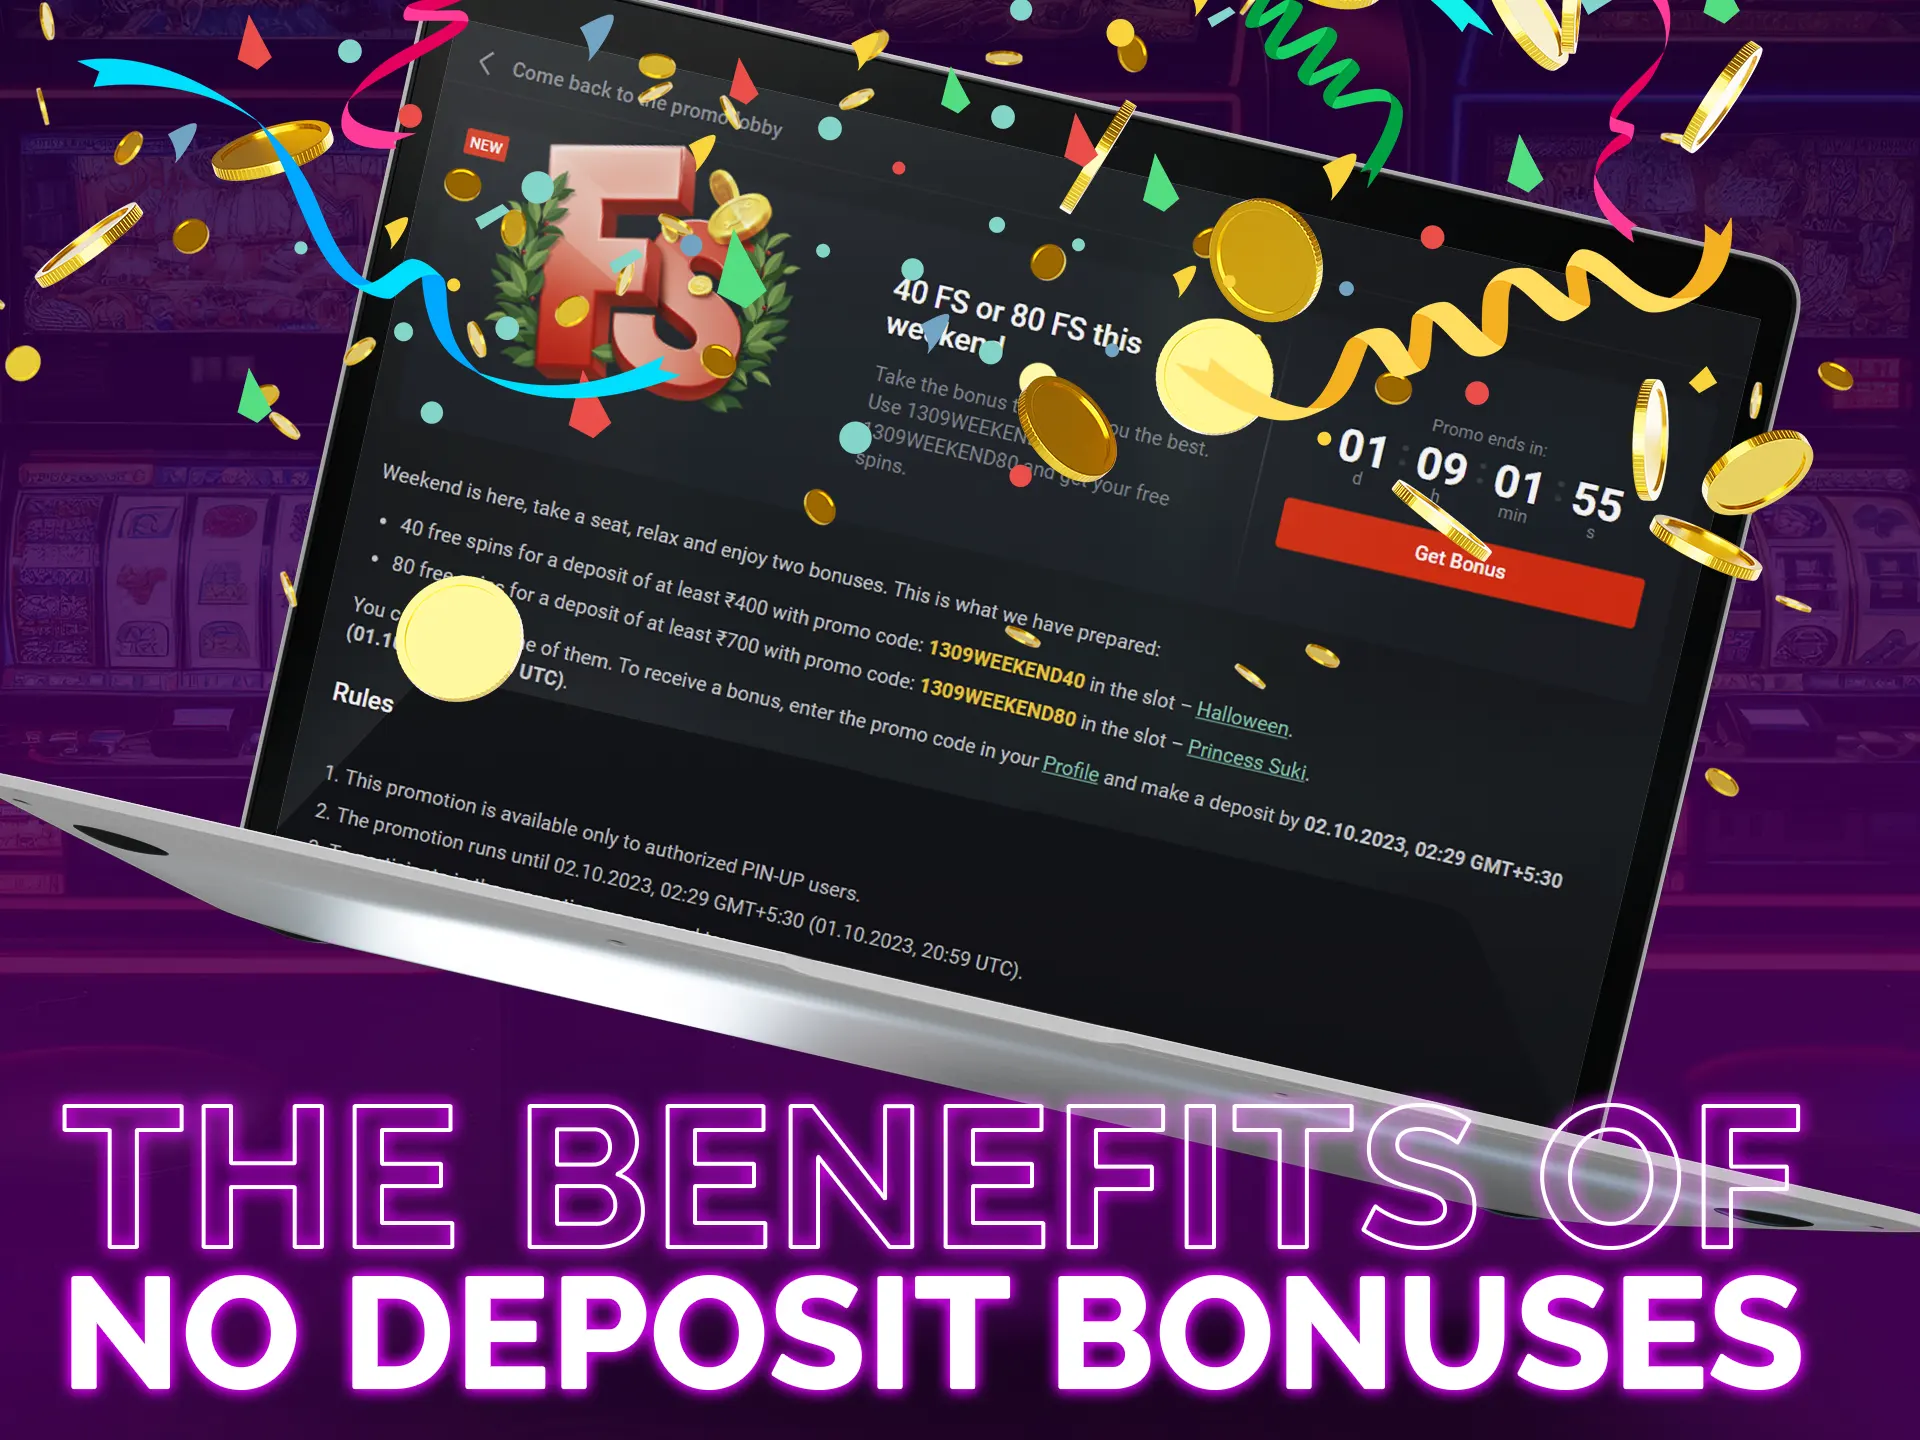 Here the list of the benefits of no-deposit bonuses.